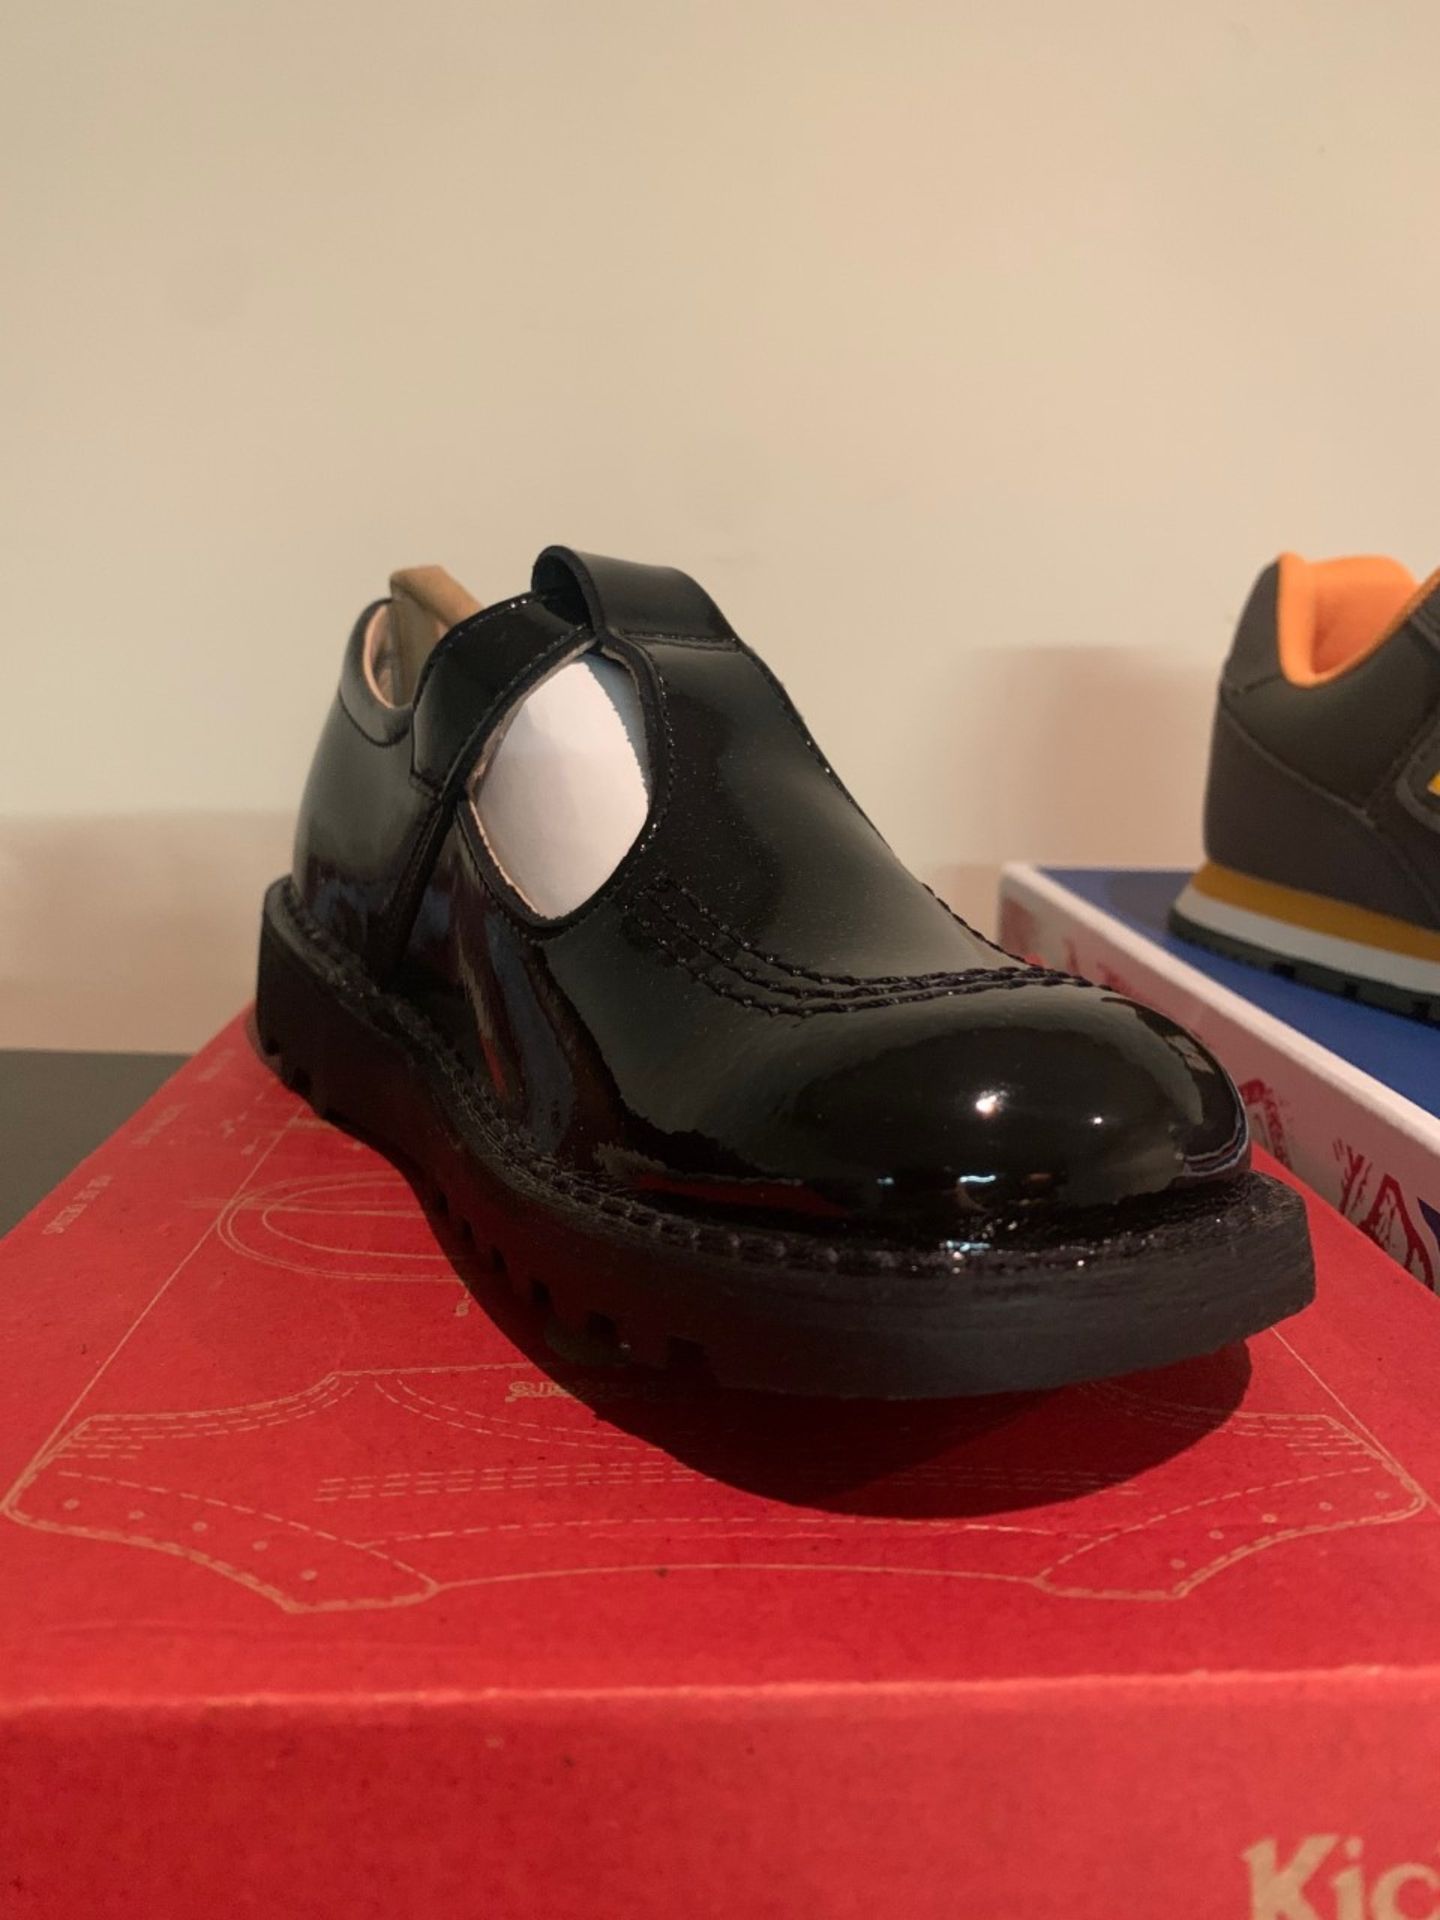 NEW & BOXED KICKERS BLACK PATENT SHOE SIZE INFANT 13 (150/21) - Image 2 of 2